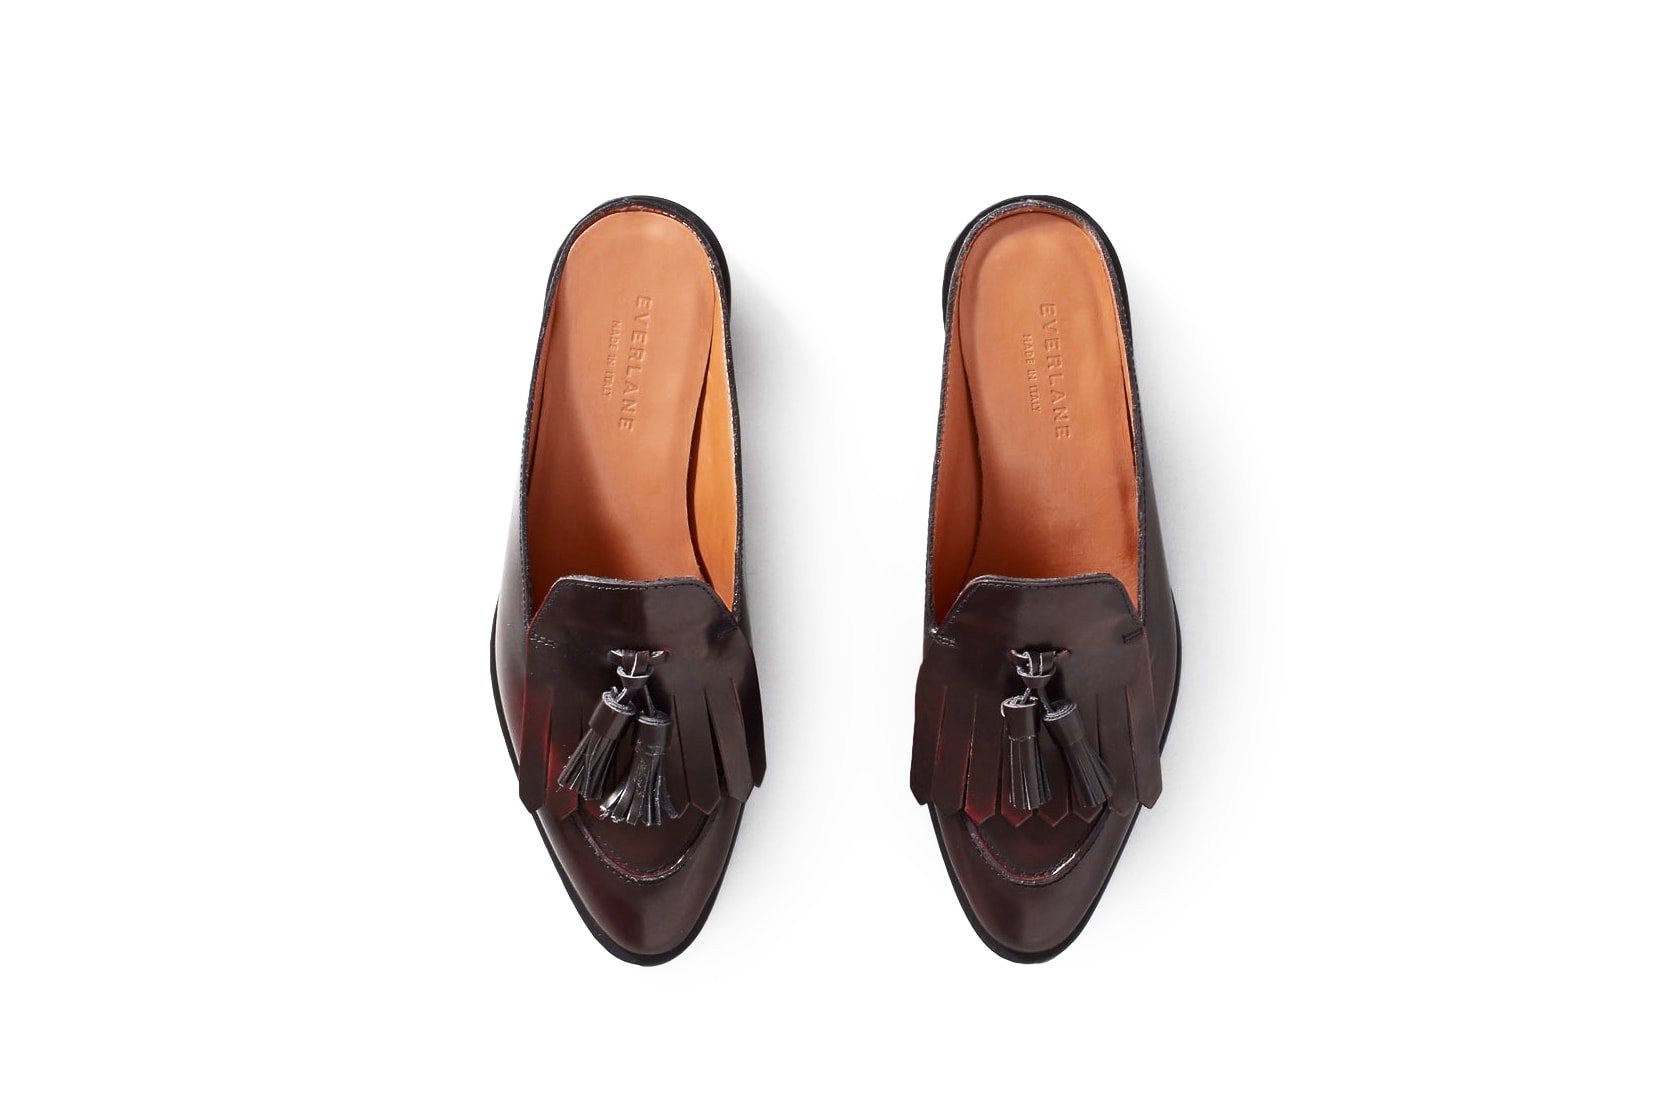 Everlane Classic Leather Mules Black Burgundy White Loafers Slippers Shoes